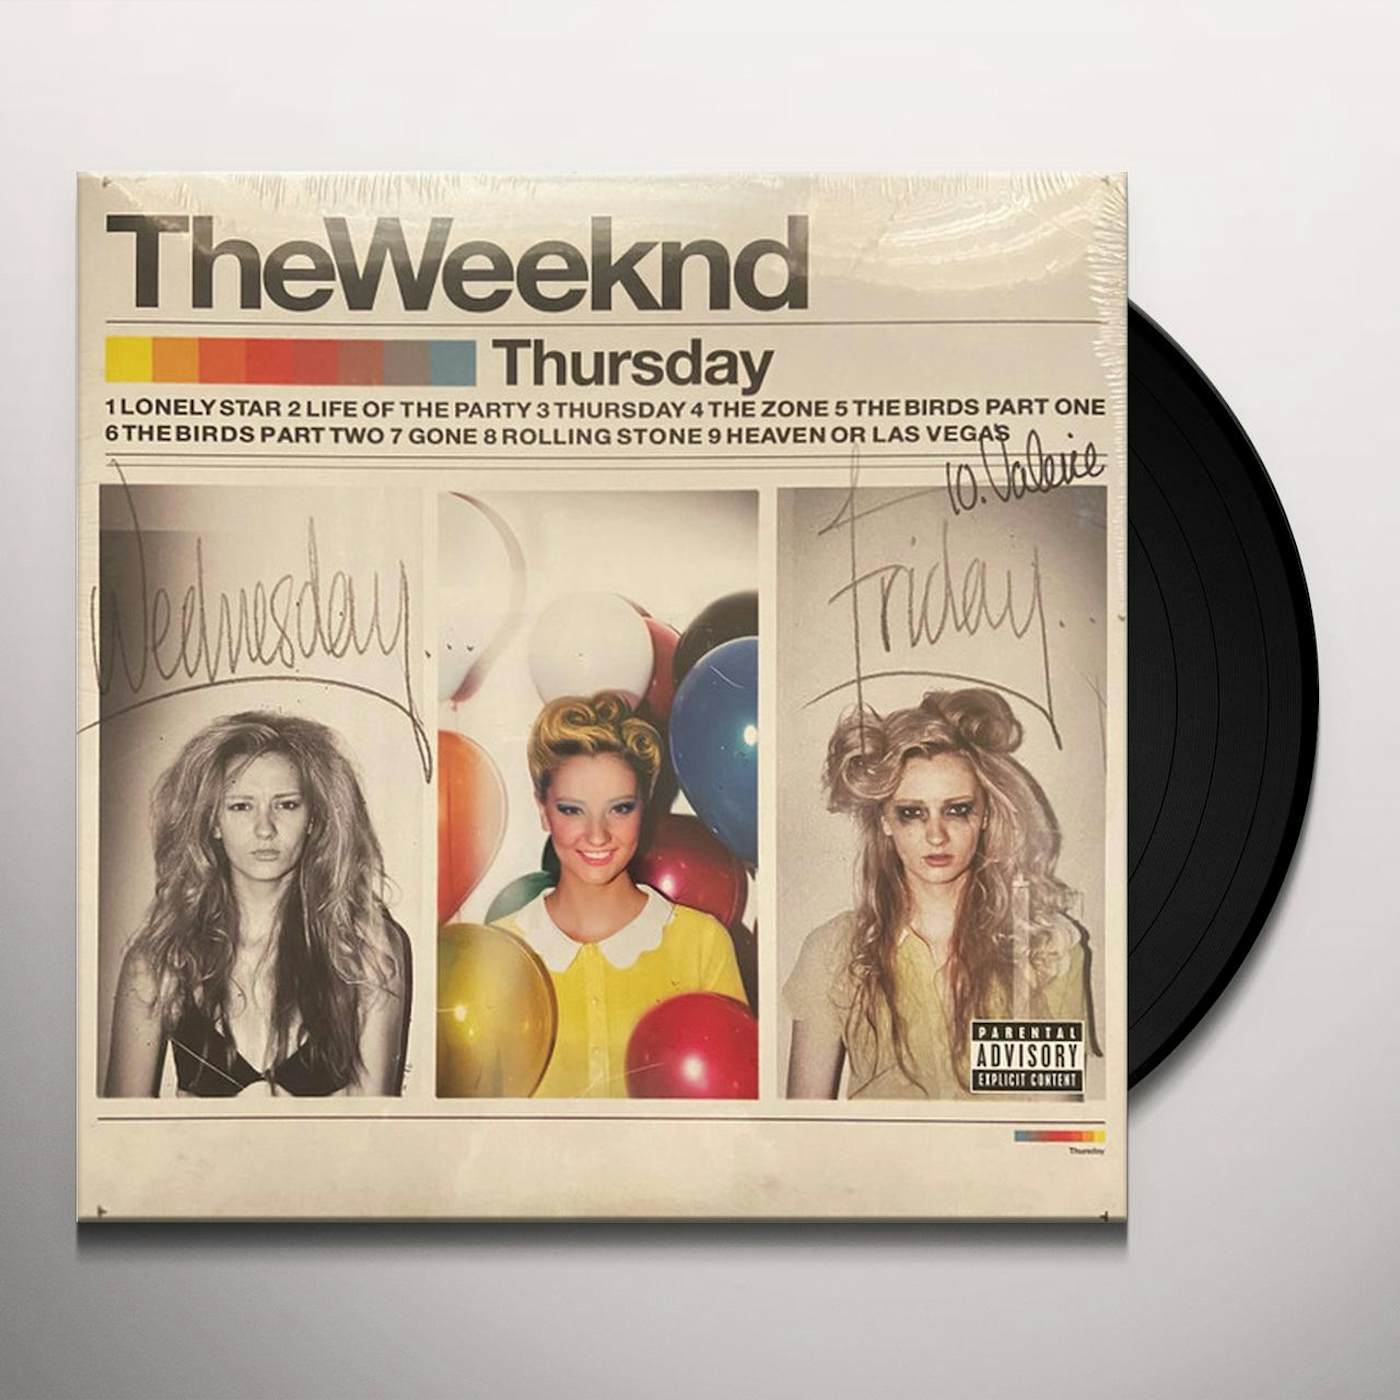 The Weeknd IDOL VOL. 1 (MUSIC FROM THE HBO ORIGINAL SERIES) CD